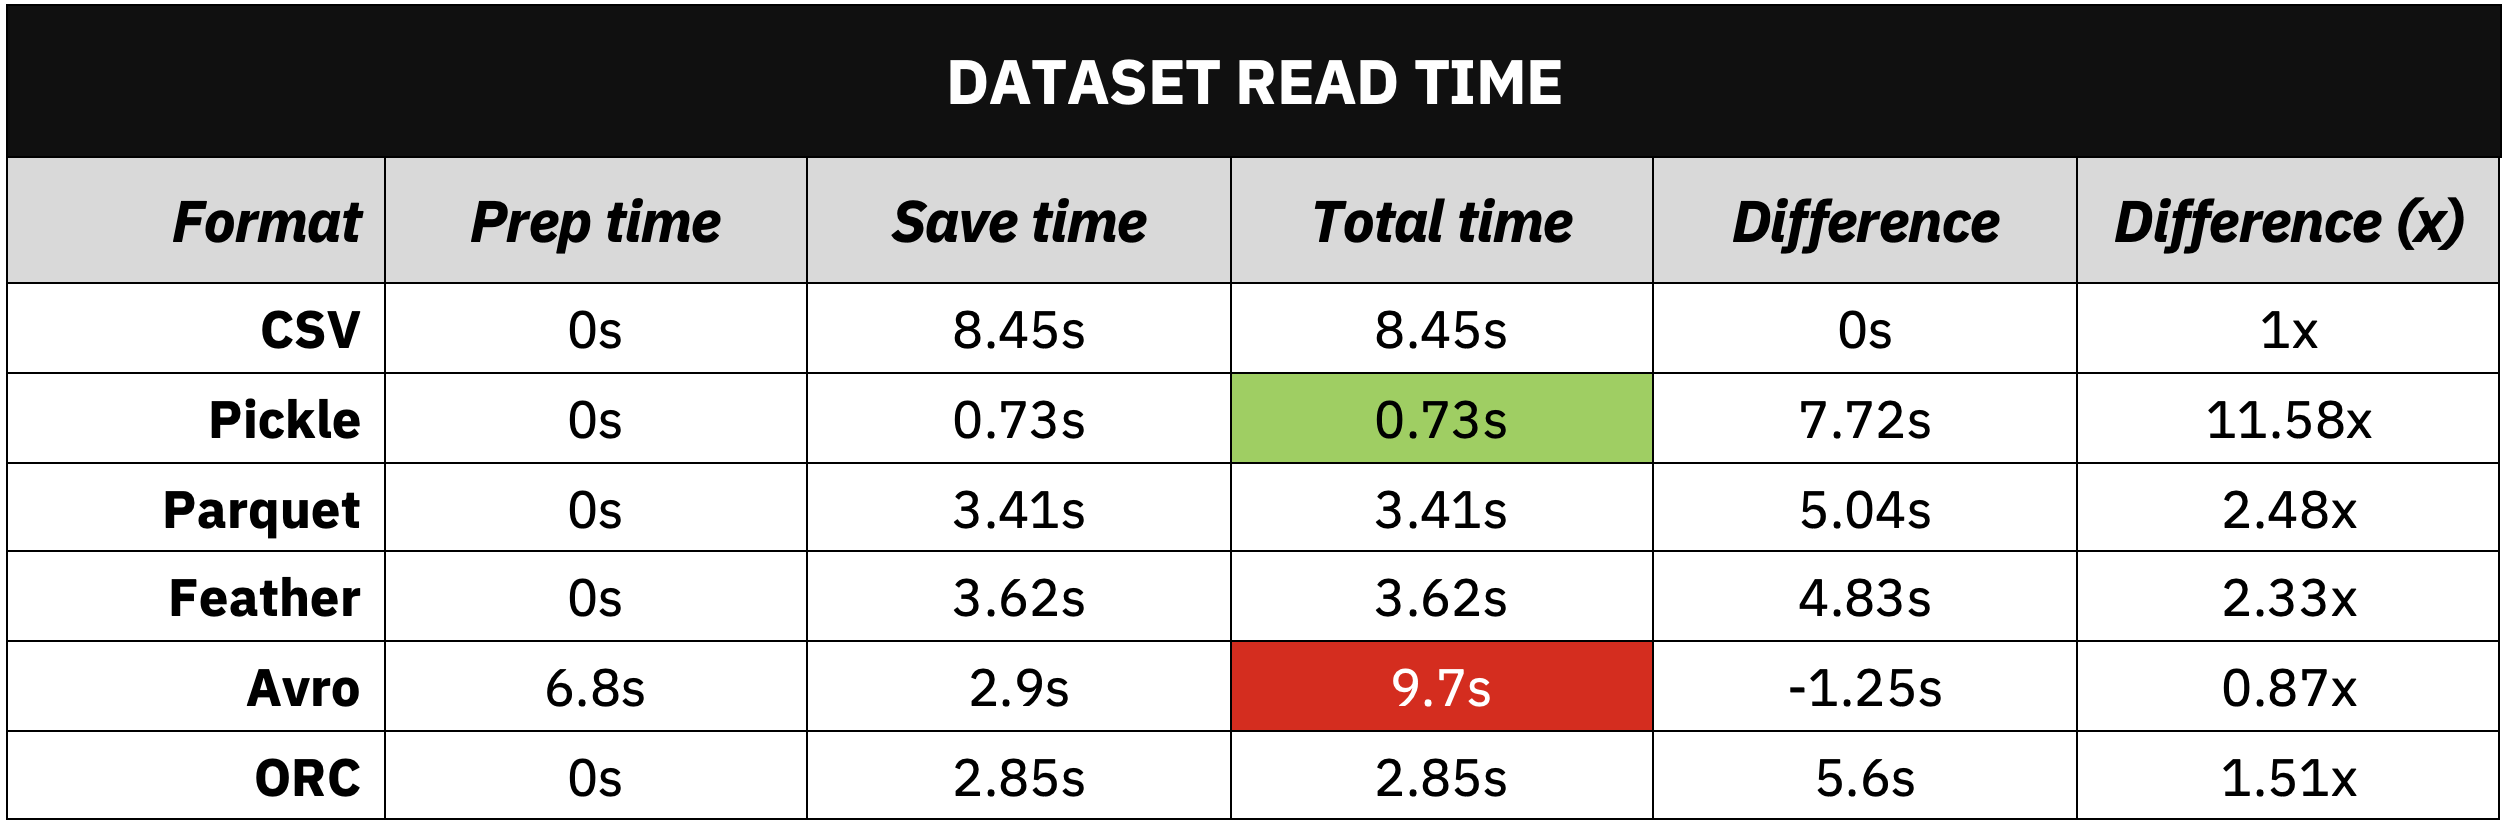 Image 3 - Dataset read time comparison (image by author)